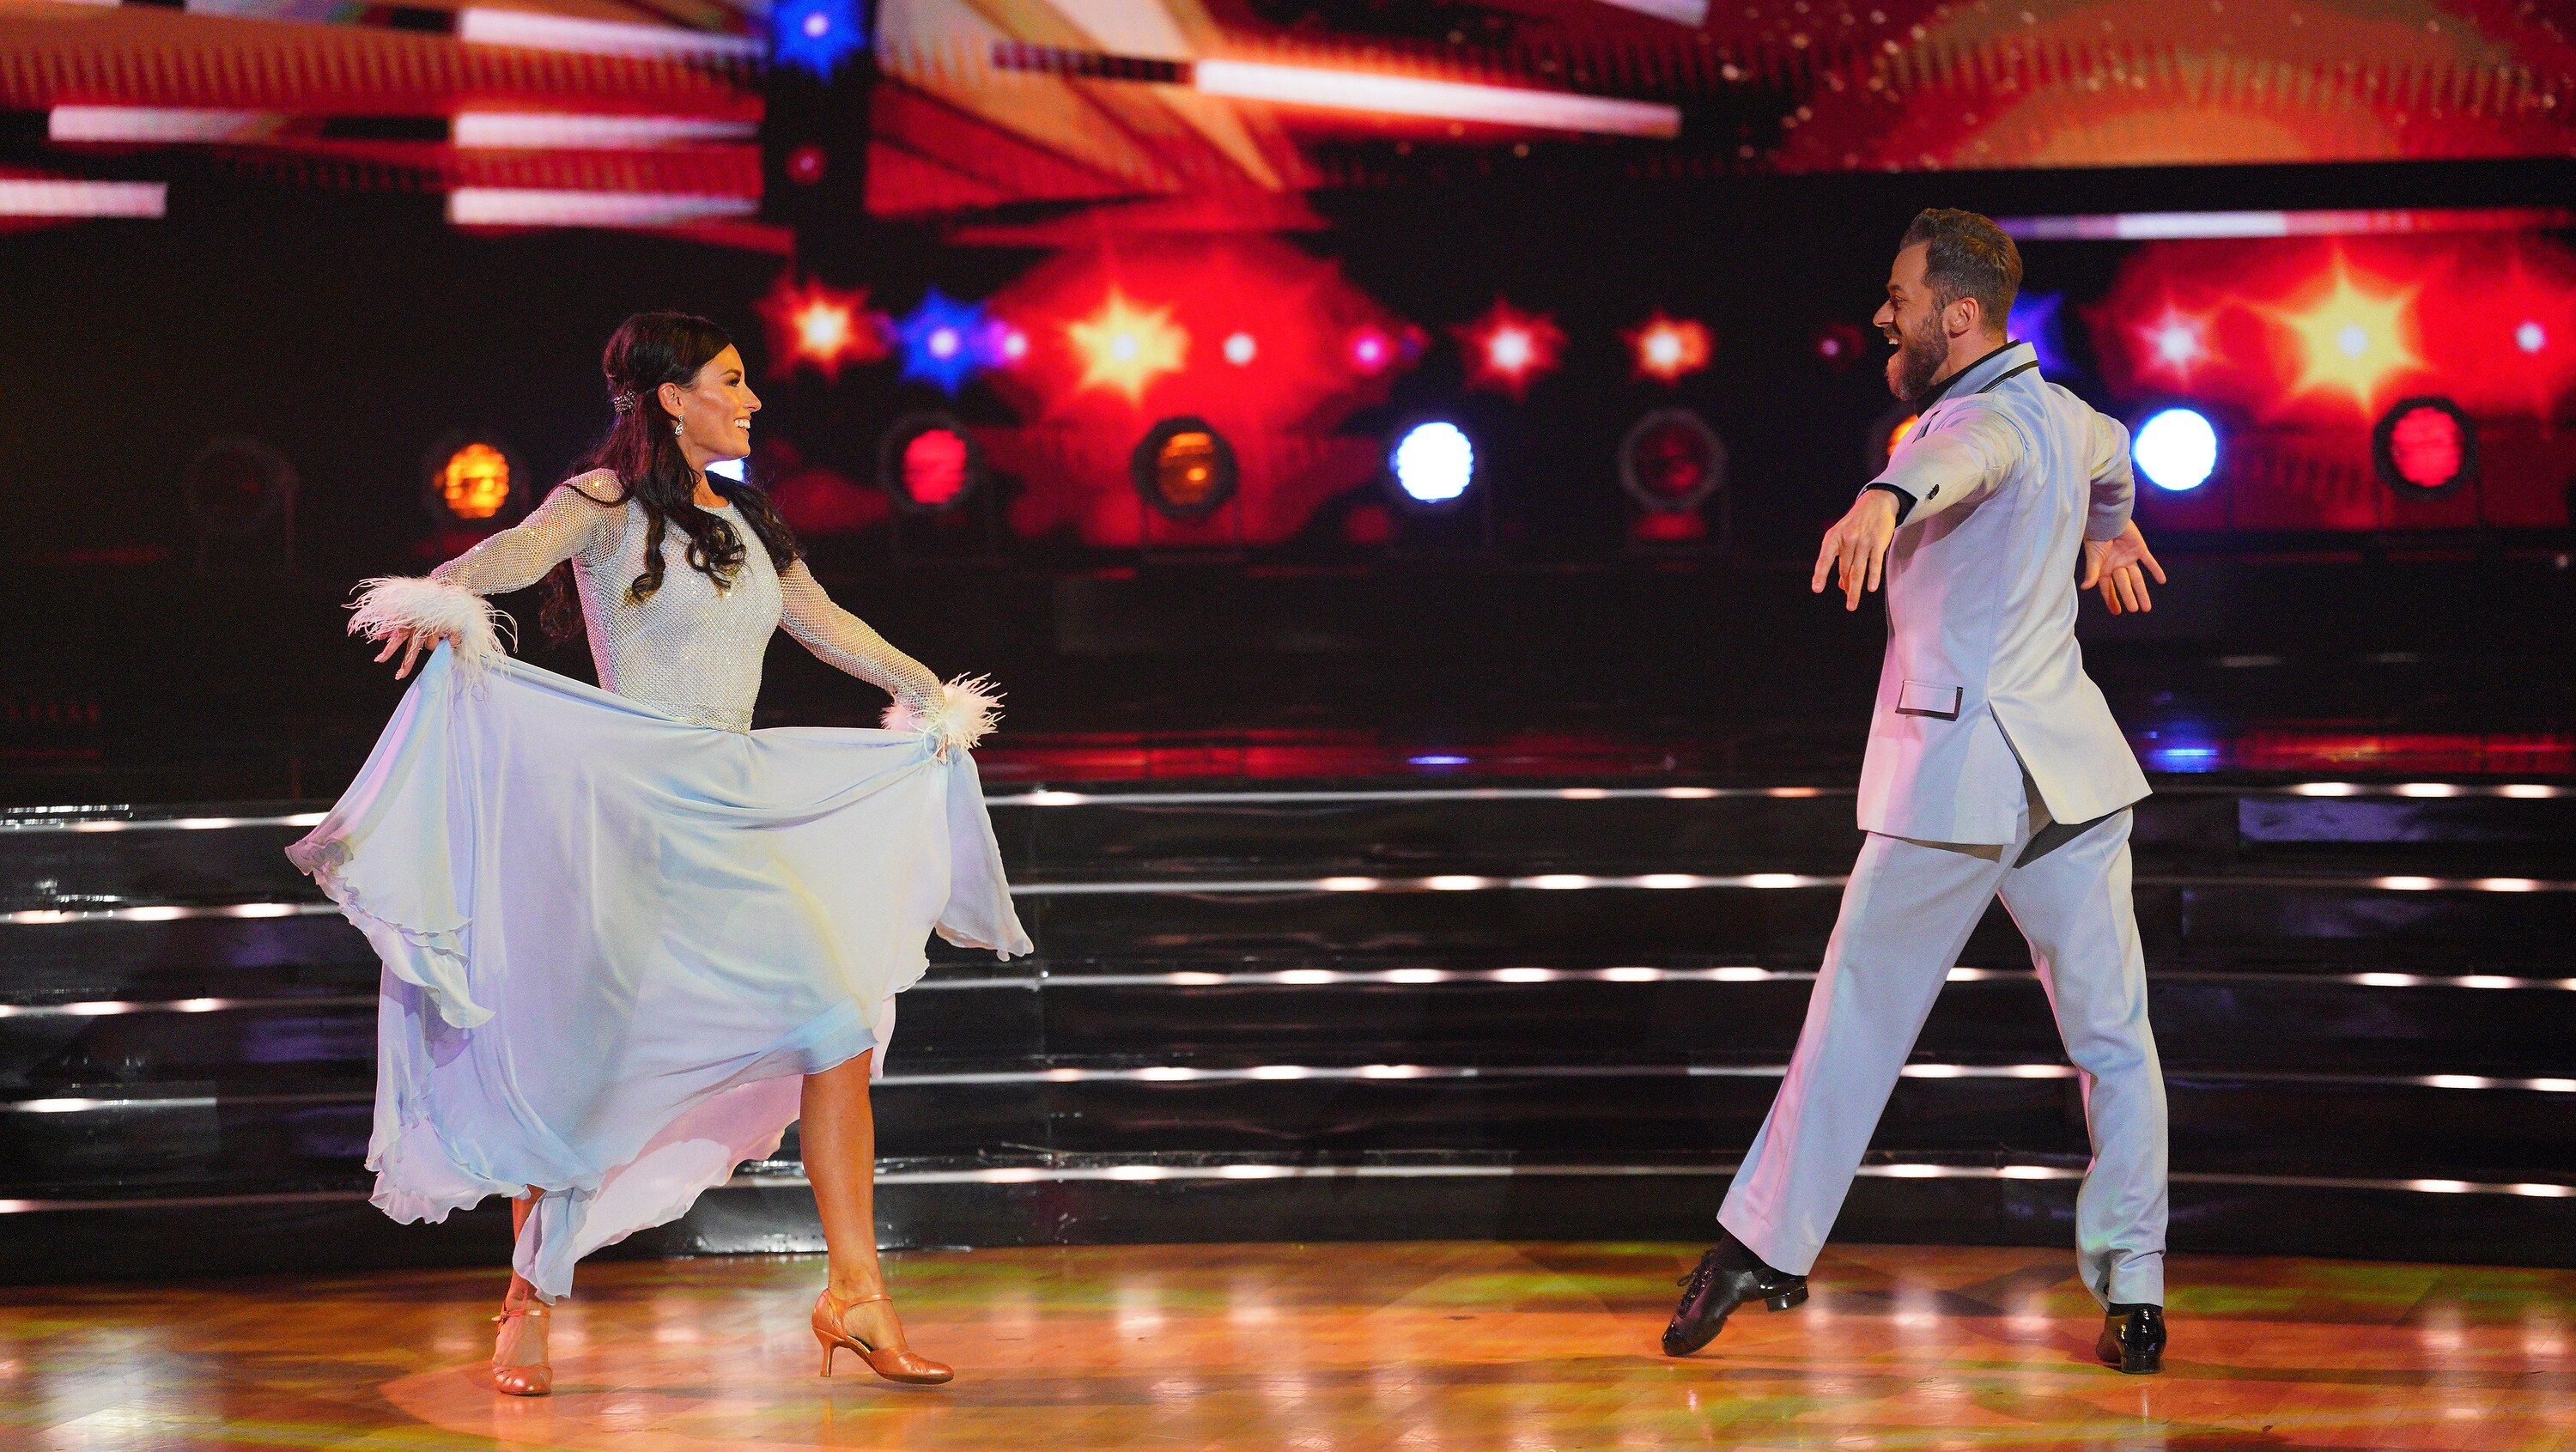 DANCING WITH THE STARS - “Elvis Night” –  The 15 remaining couples “Can’t Help Falling in Love” with Elvis this week as they take on all-new dance styles to music by The King of Rock ‘n’ Roll. Week two of the mirorrball competition will stream live MONDAY, SEPT. 26 (8:00pm ET / 5:00pm PT), on Disney+. (ABC/Christopher Willard) HEIDI D’AMELIO, ARTEM CHIGVINTSEV